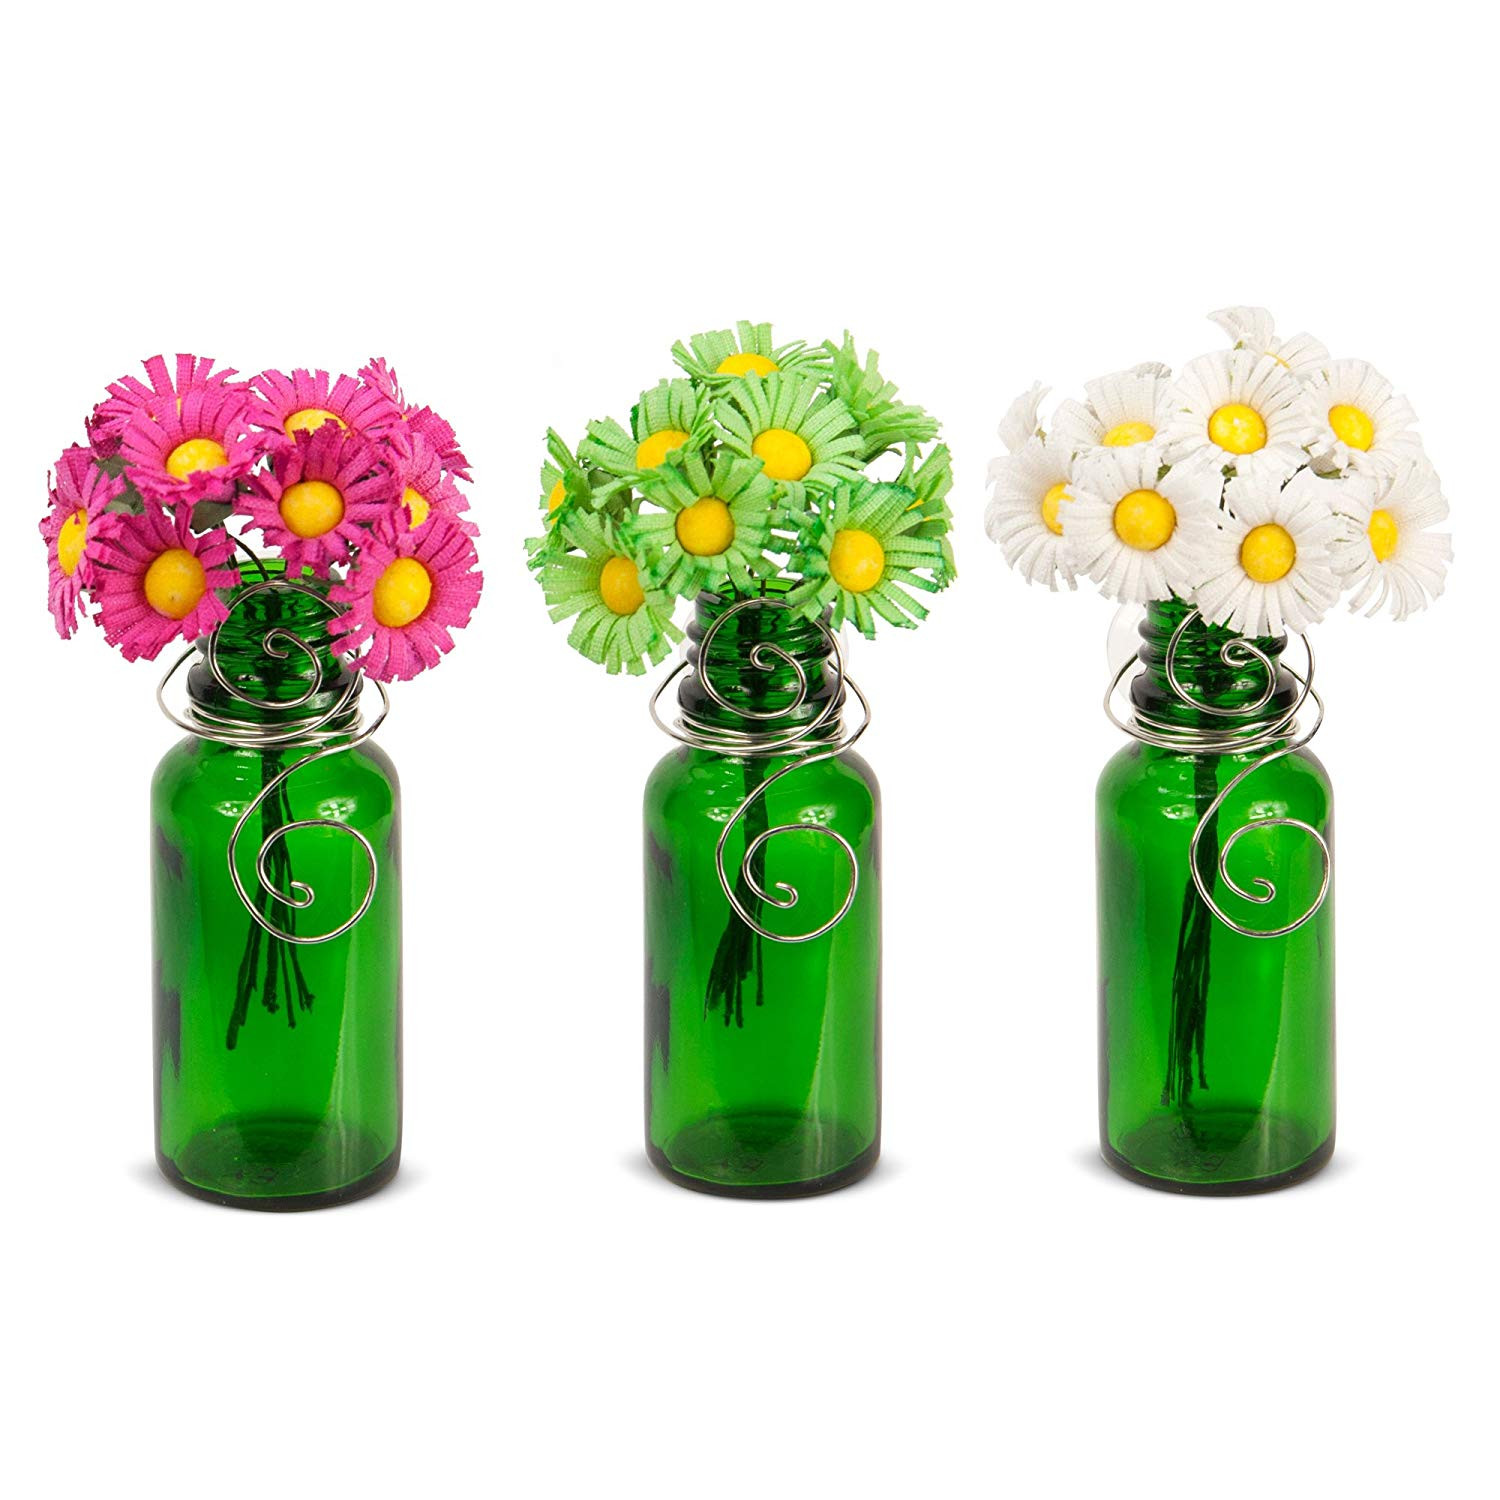 glass bubble wall vase of amazon com vazzini mini vase bouquet suction cup bud bottle pertaining to amazon com vazzini mini vase bouquet suction cup bud bottle holder with flowers decorative for window mirrors tile wedding party favor get well